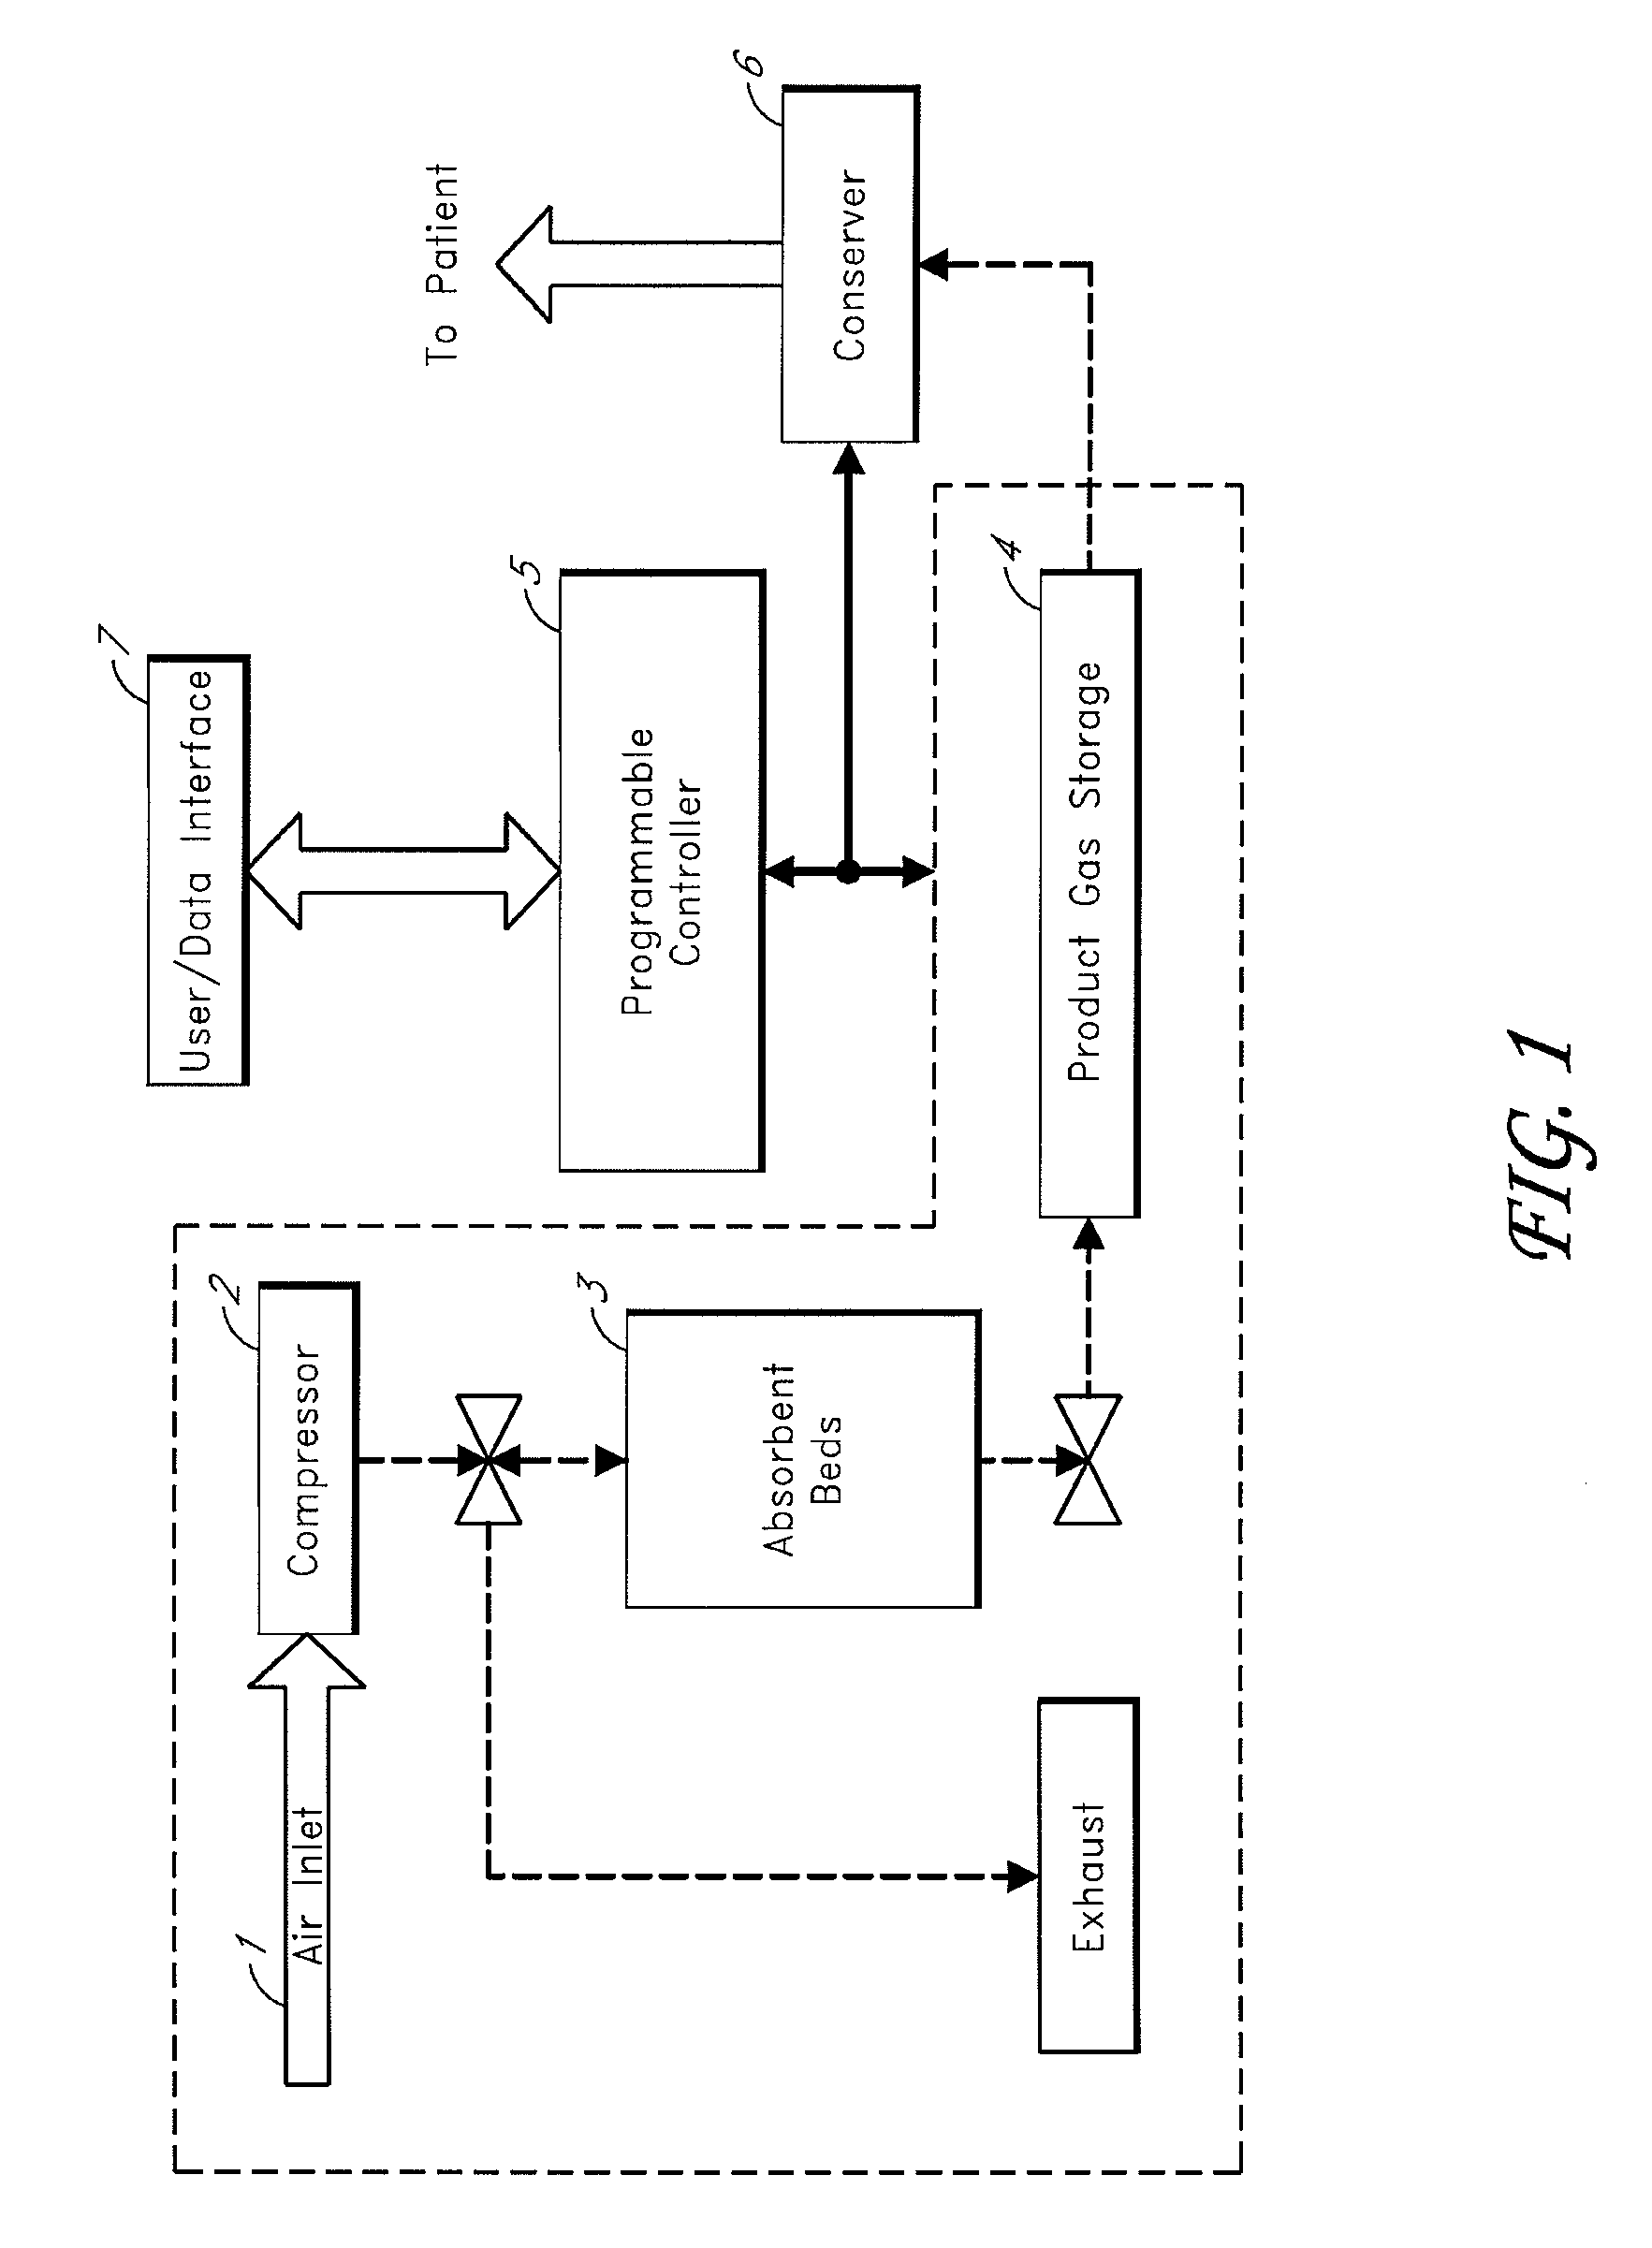 Expandable product rate portable gas fractionalization system